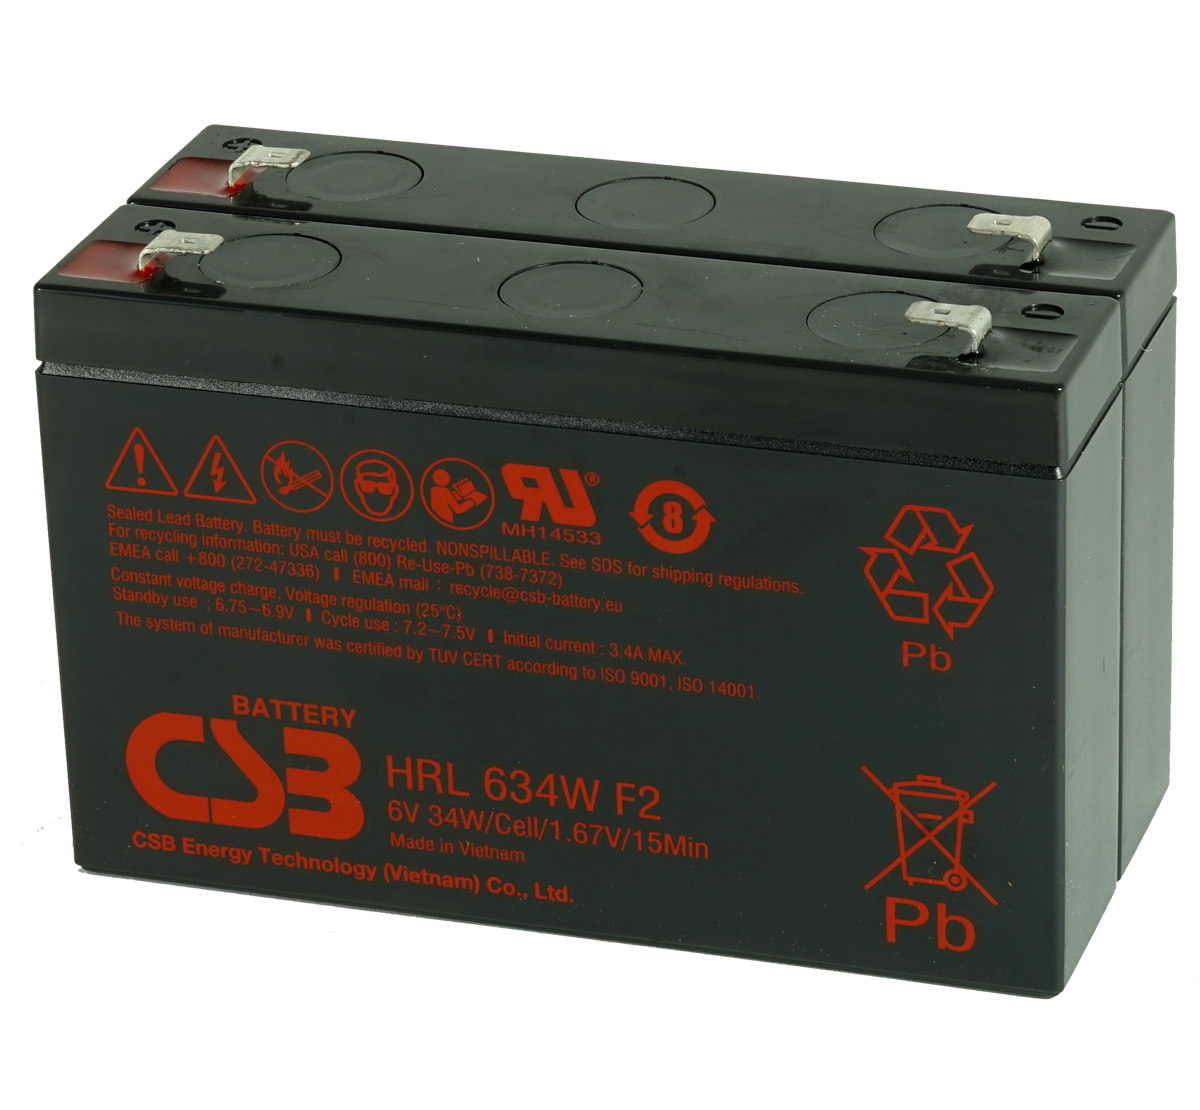 MDS2317 UPS Battery Kit for MGE AB2317